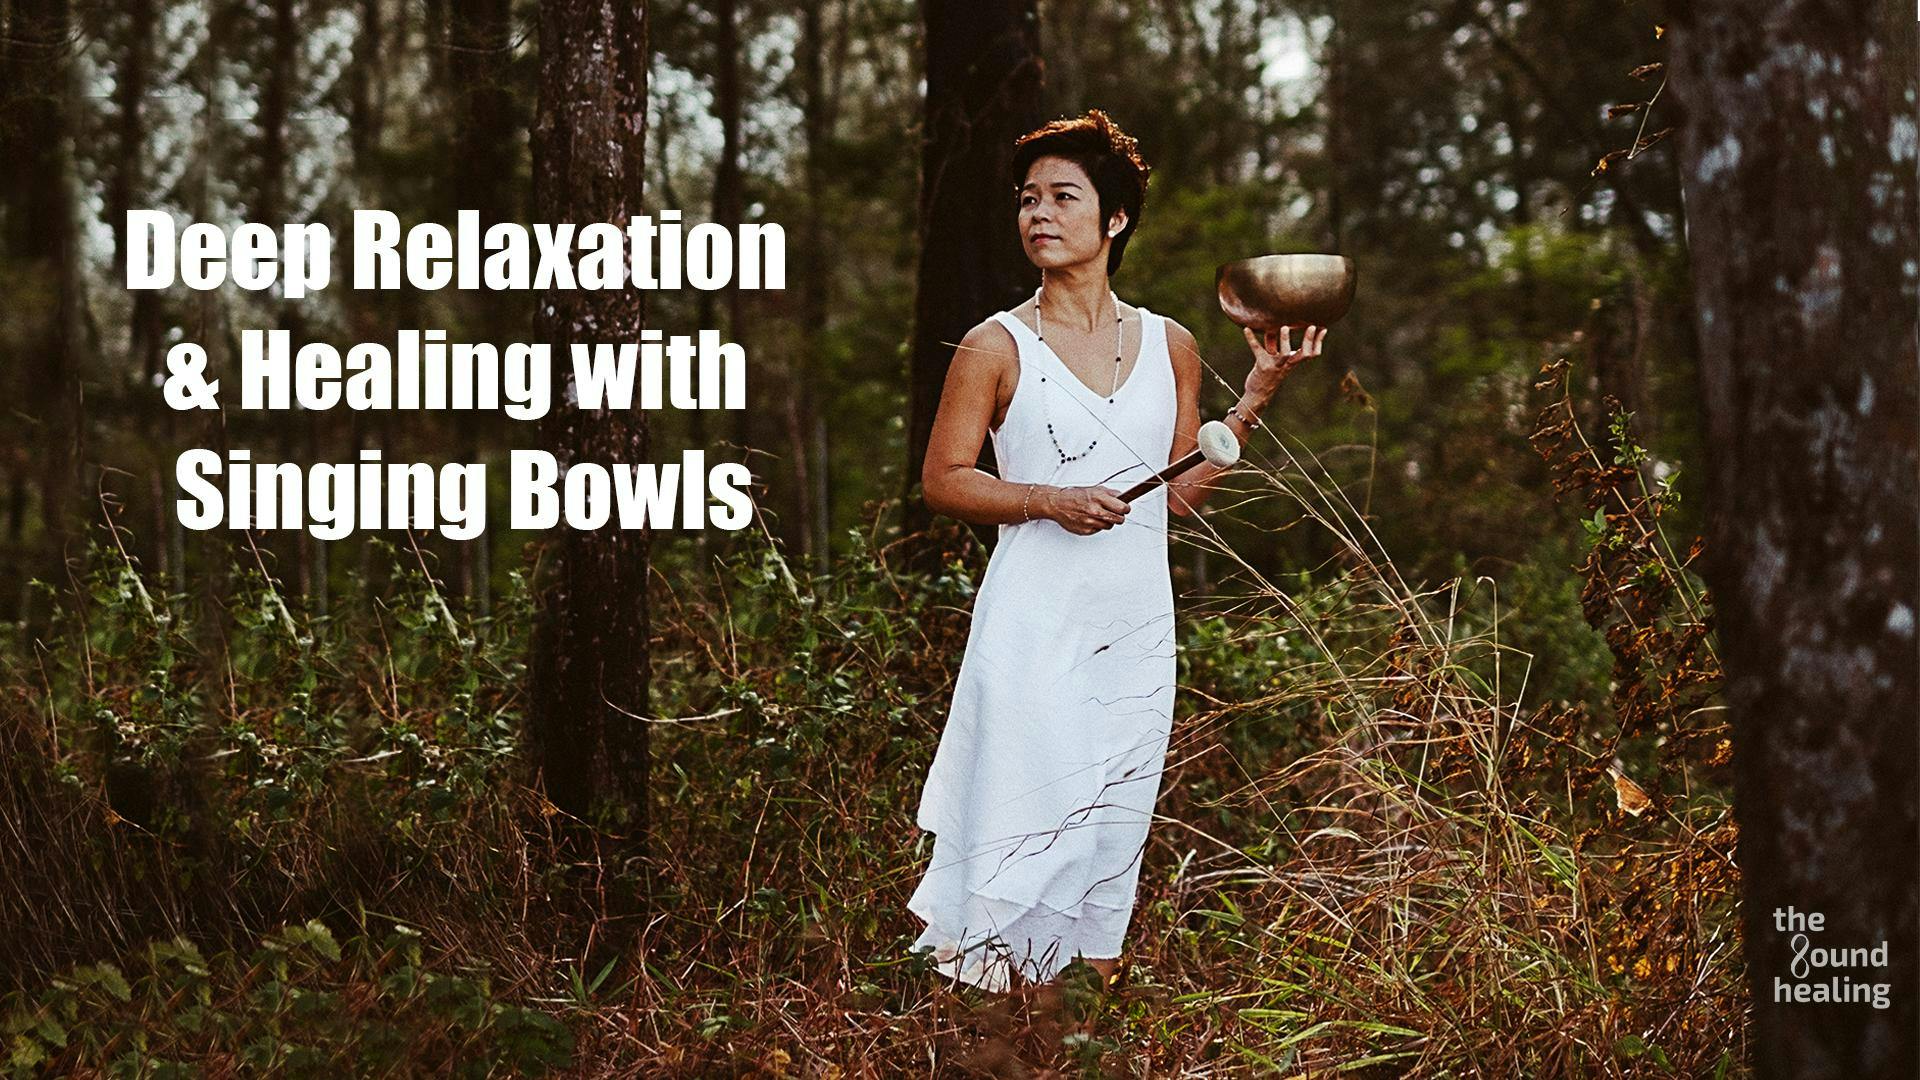 Deep Relaxation and Healing with Singing Bowls on 27 April